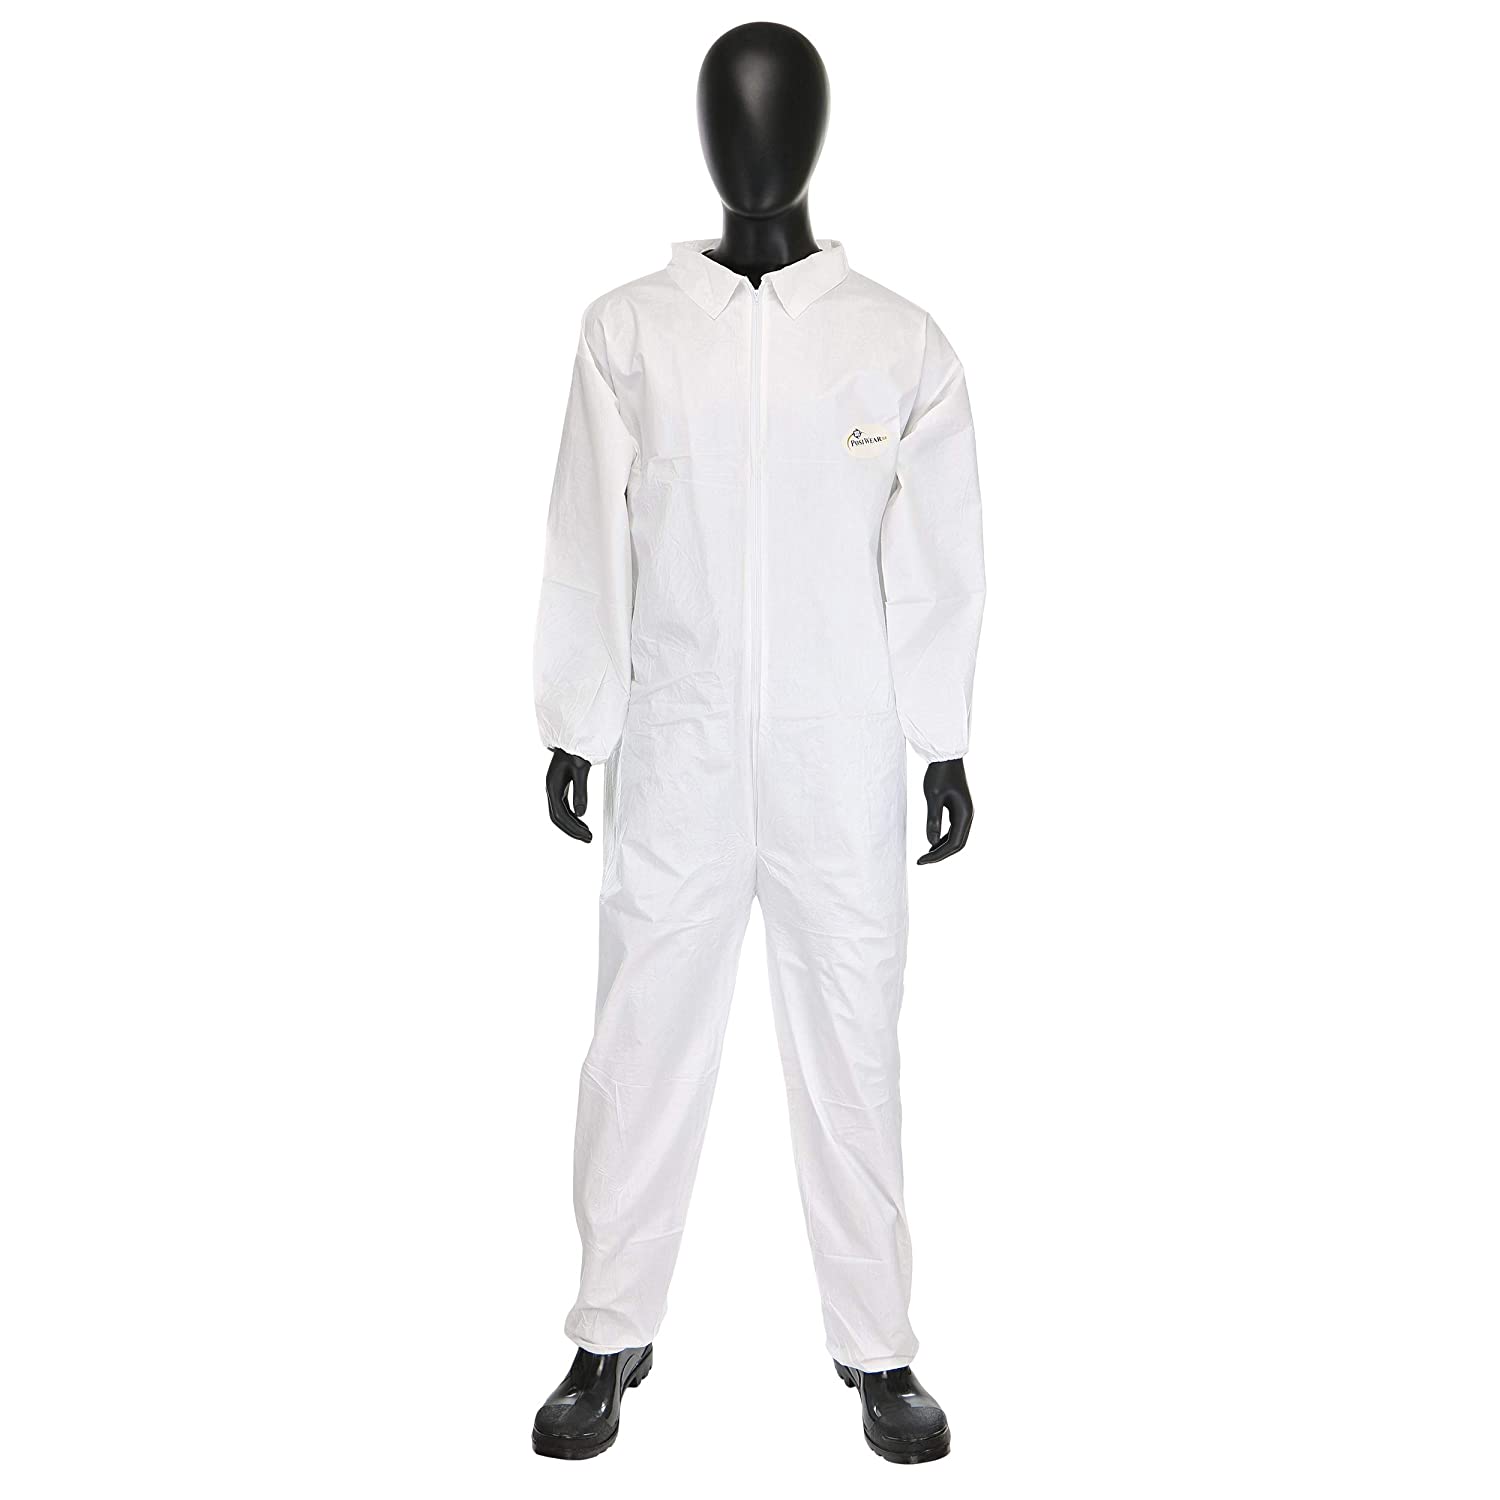 West Chester 3602 Polypropylene PosiWear BA: Breathable Advantage Microporous Coverall – [Pack of 25] XXX-Large, Safety Overall with Zipper Front, Collar, Elastic Wrist, Ankle